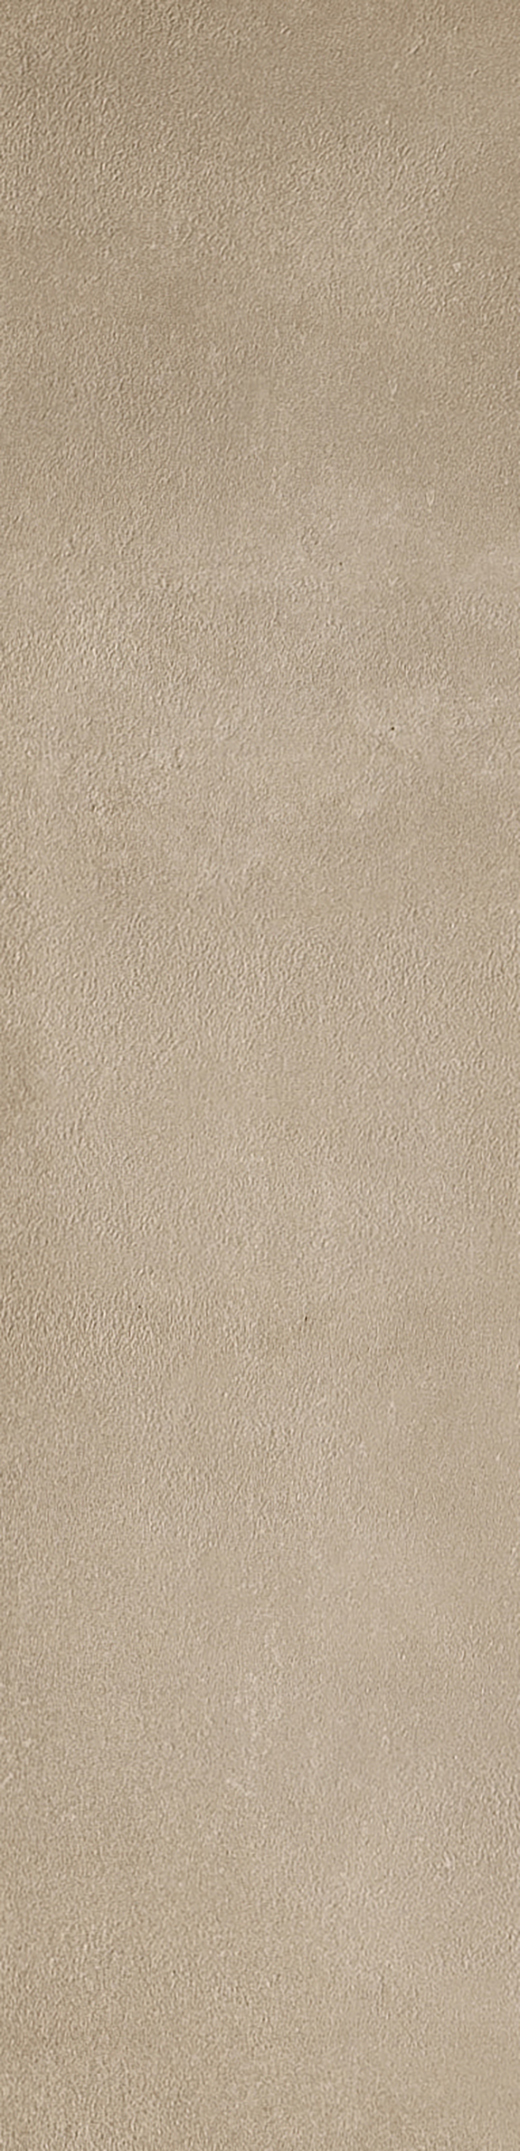 Industry Taupe Soft 8"x32 | Through Body Porcelain | Floor/Wall Tile